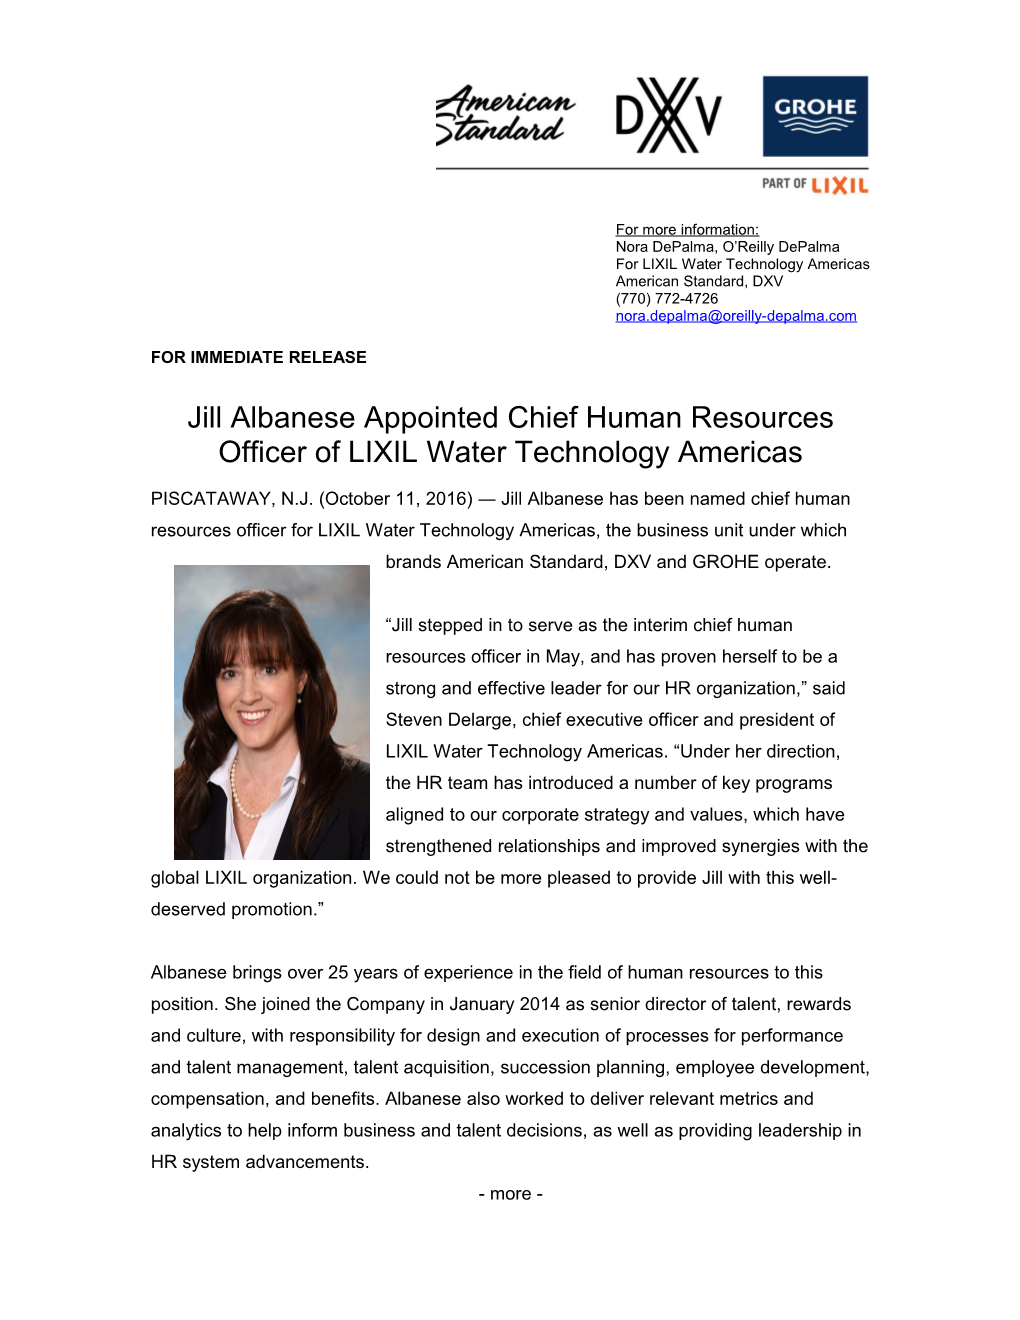 Jill Albanese Appointed Chief Human Resources Officer of LIXIL Water Technology Americas1-1-1